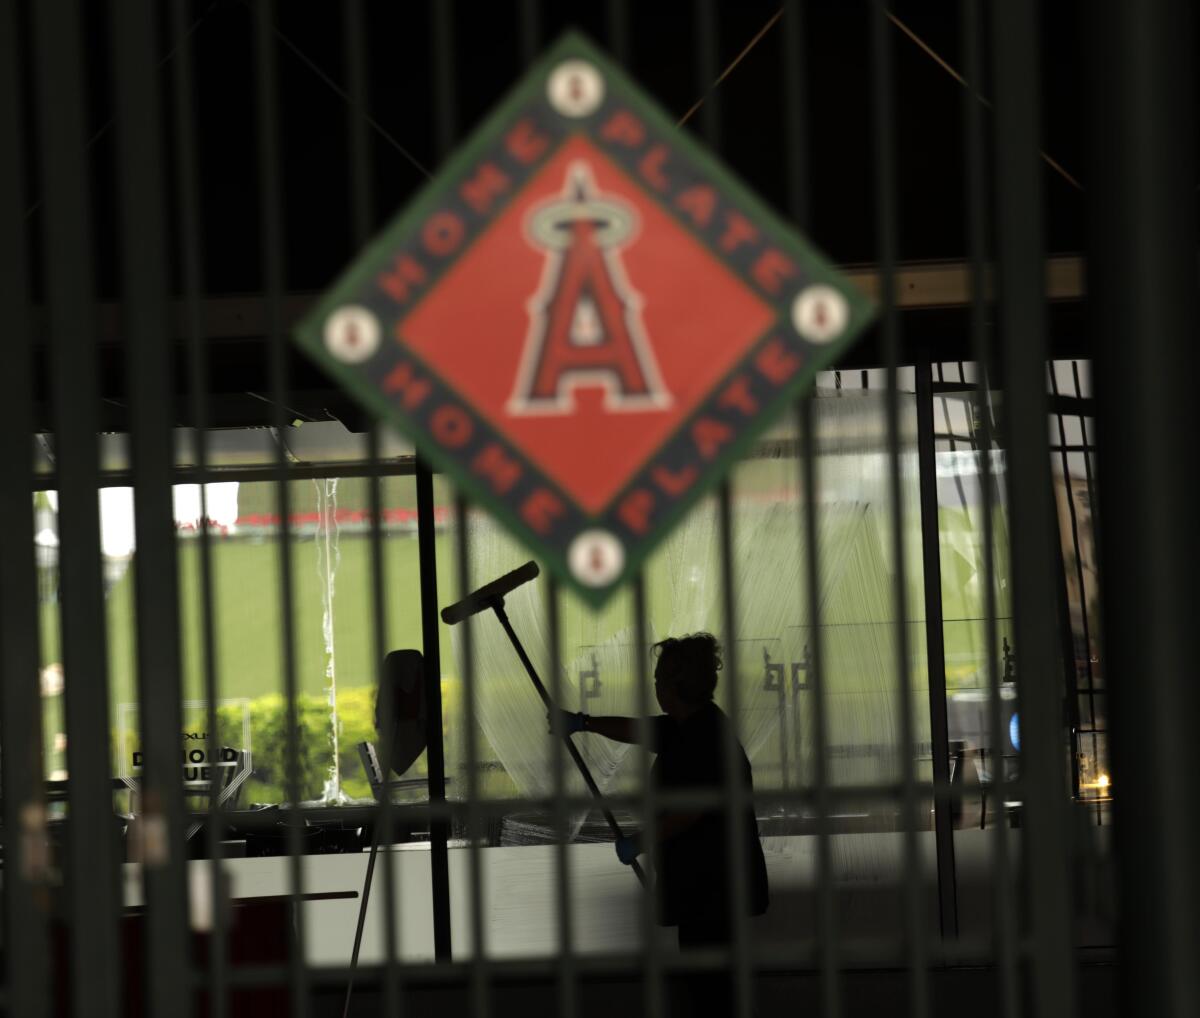 Step Inside: Angel Stadium of Anaheim - Home of the Los Angeles Angels -  Ticketmaster Blog